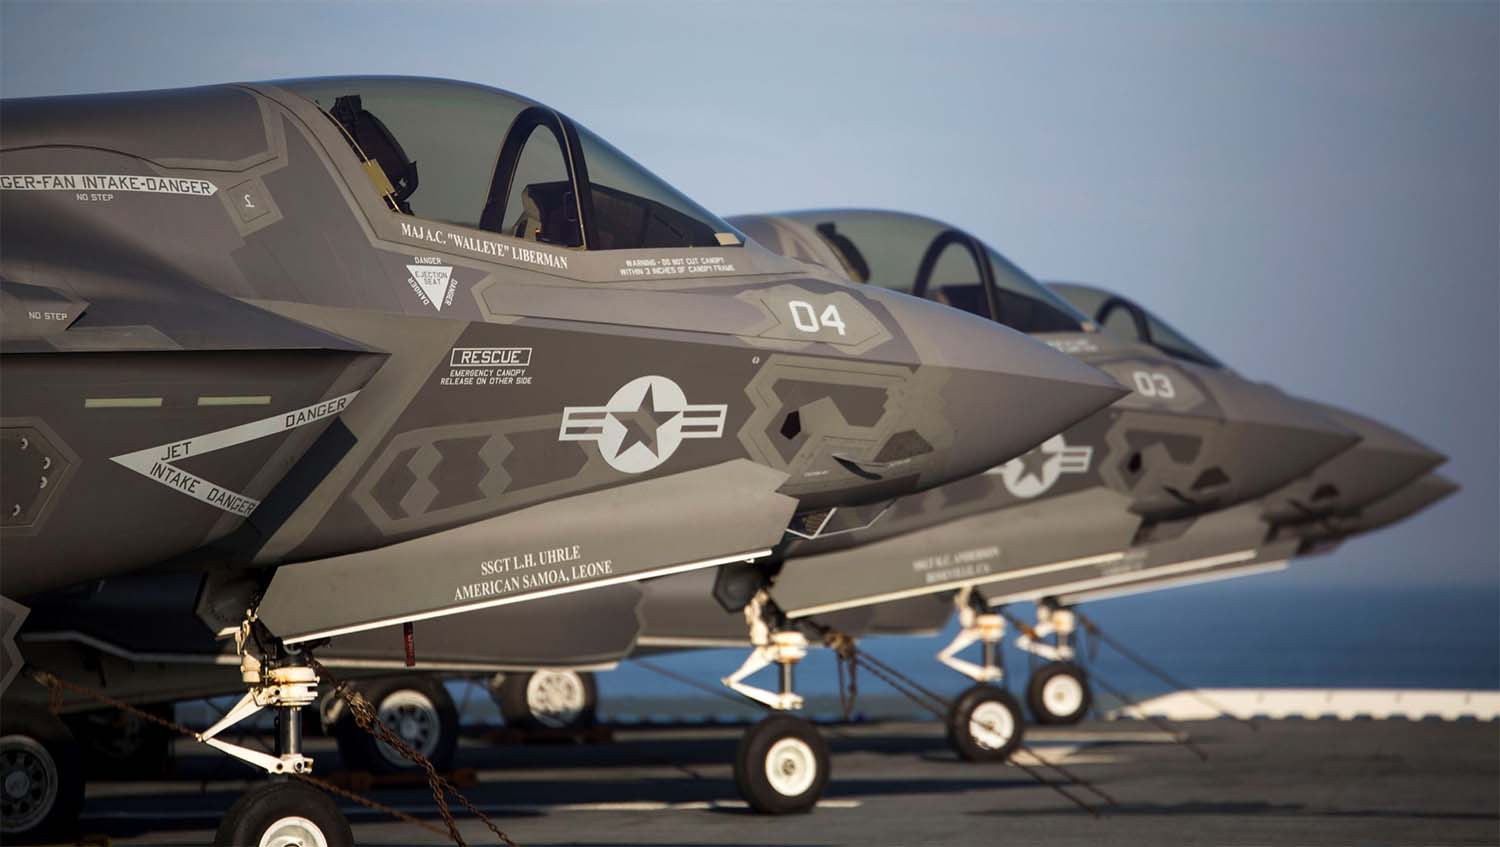 The package includes 50 F-35 Lighting II aircraft, up to 18 MQ-9B Unmanned Aerial Systems and a package of air-to-air and air-to-ground munitions